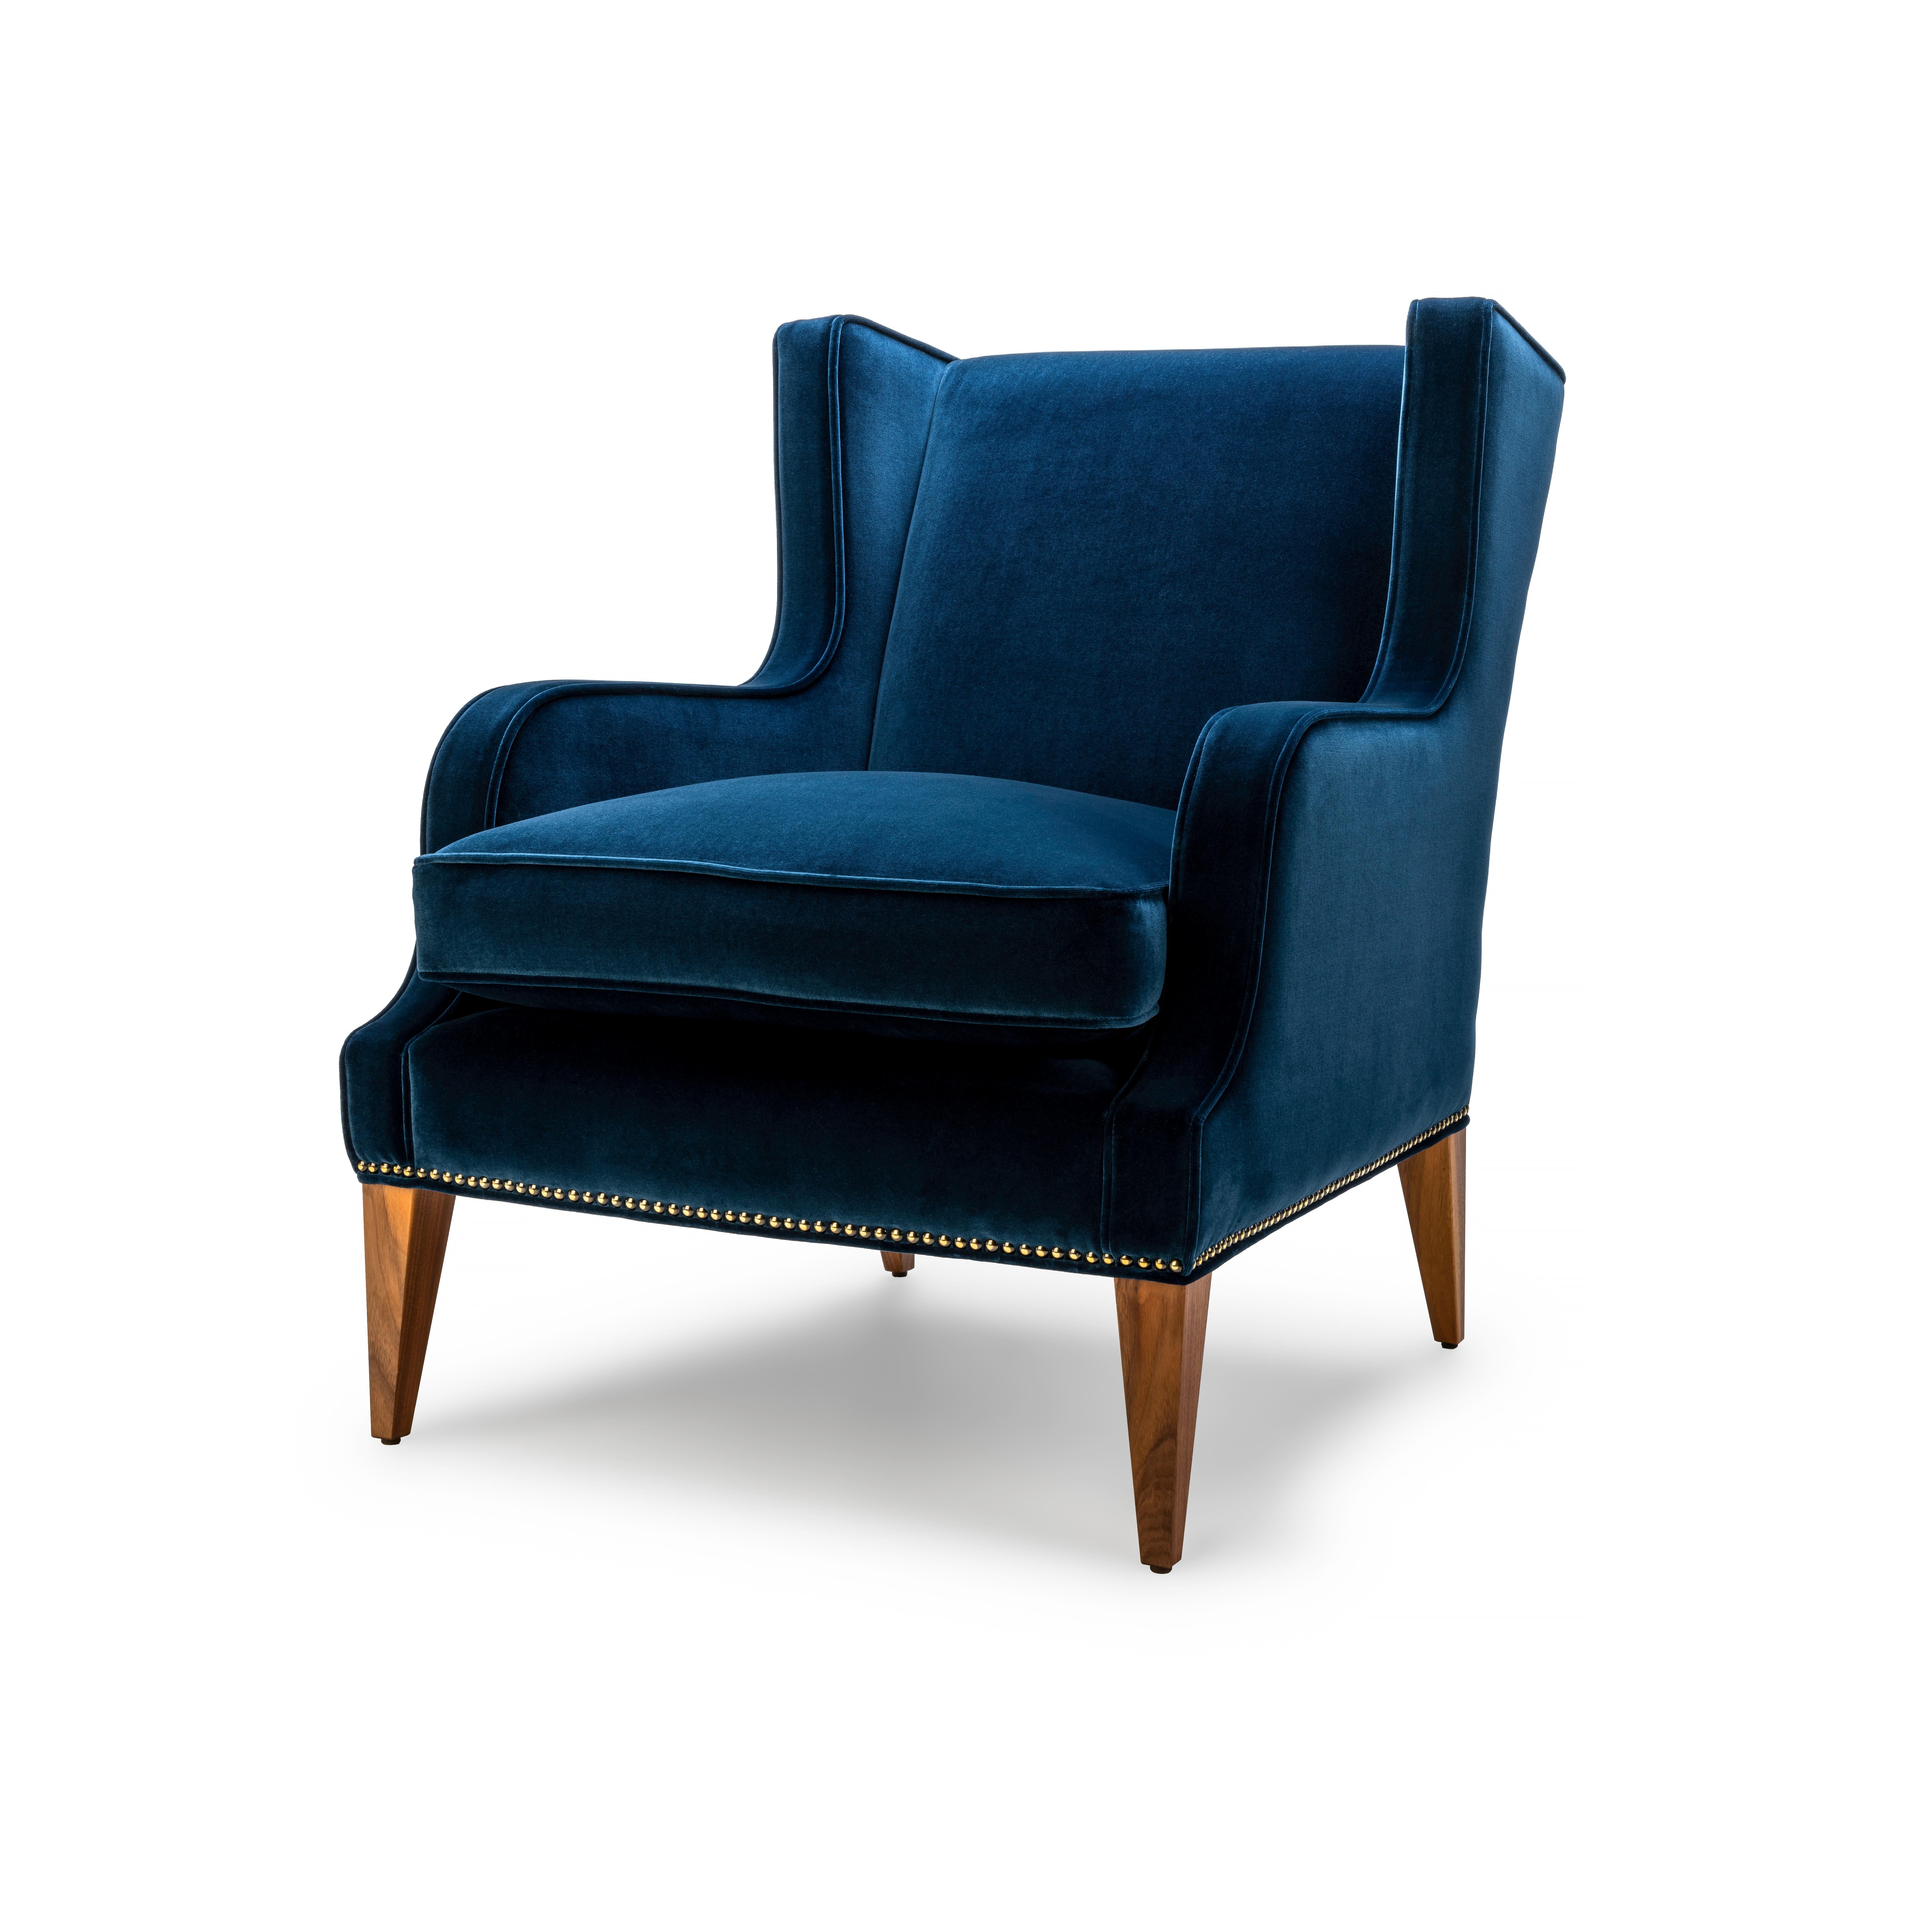 The Alae is available as a wing or lounge chair and features sleek sculptural lines. The seat is softened perfectly with a luxurious feather and down wrapped cushion. The Alae lounge chair shown here upholstered in denim cotton velvet with legs in